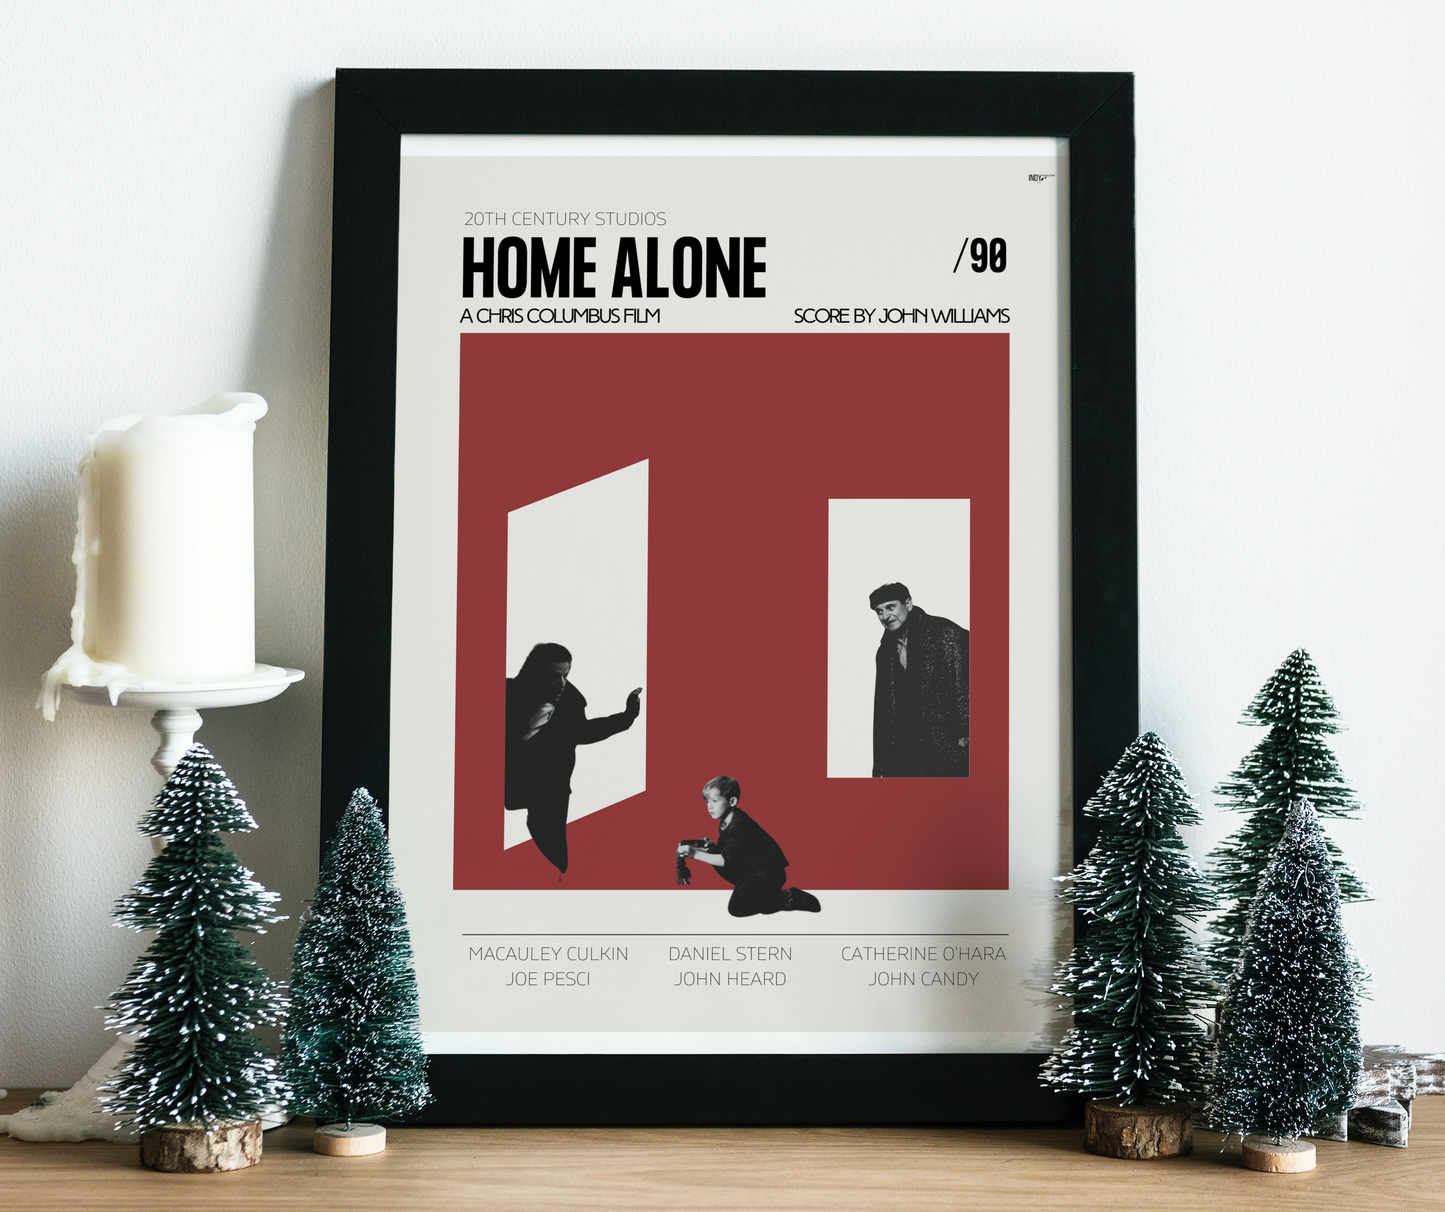 "Home Alone" Mid-Century Modern Film Poster